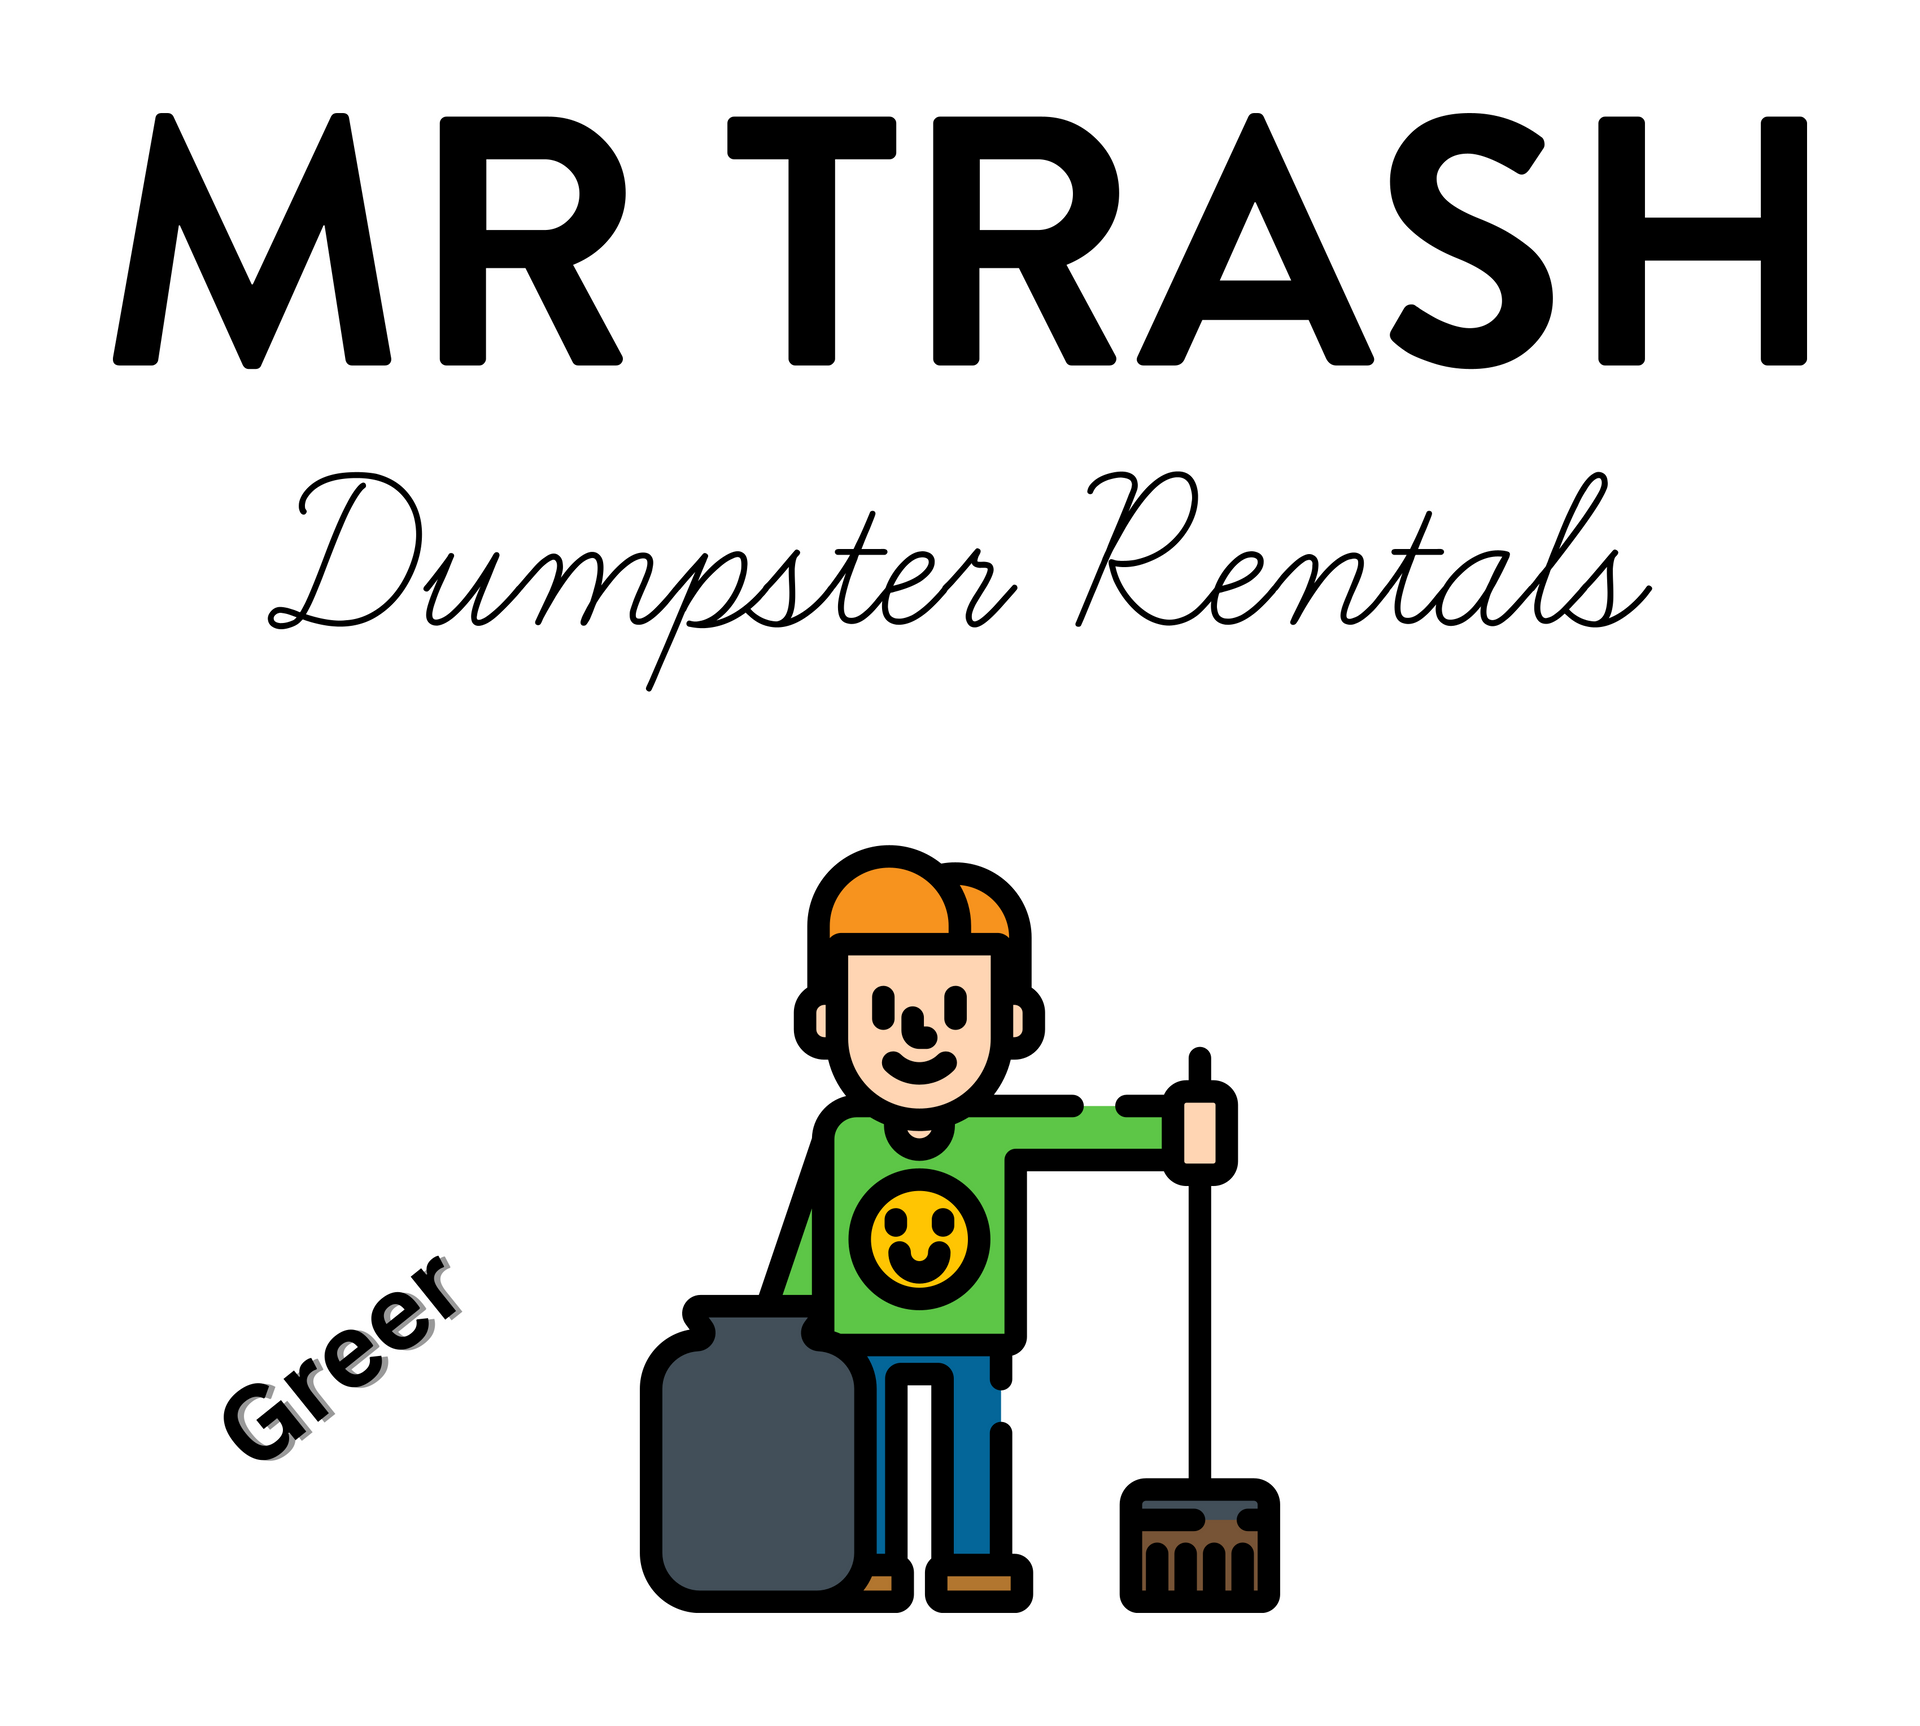 Mr. Trash Dumpster Rentals' logo: Representing our commitment to reliable and exceptional dumpster rentals in Greer, SC, and beyond.